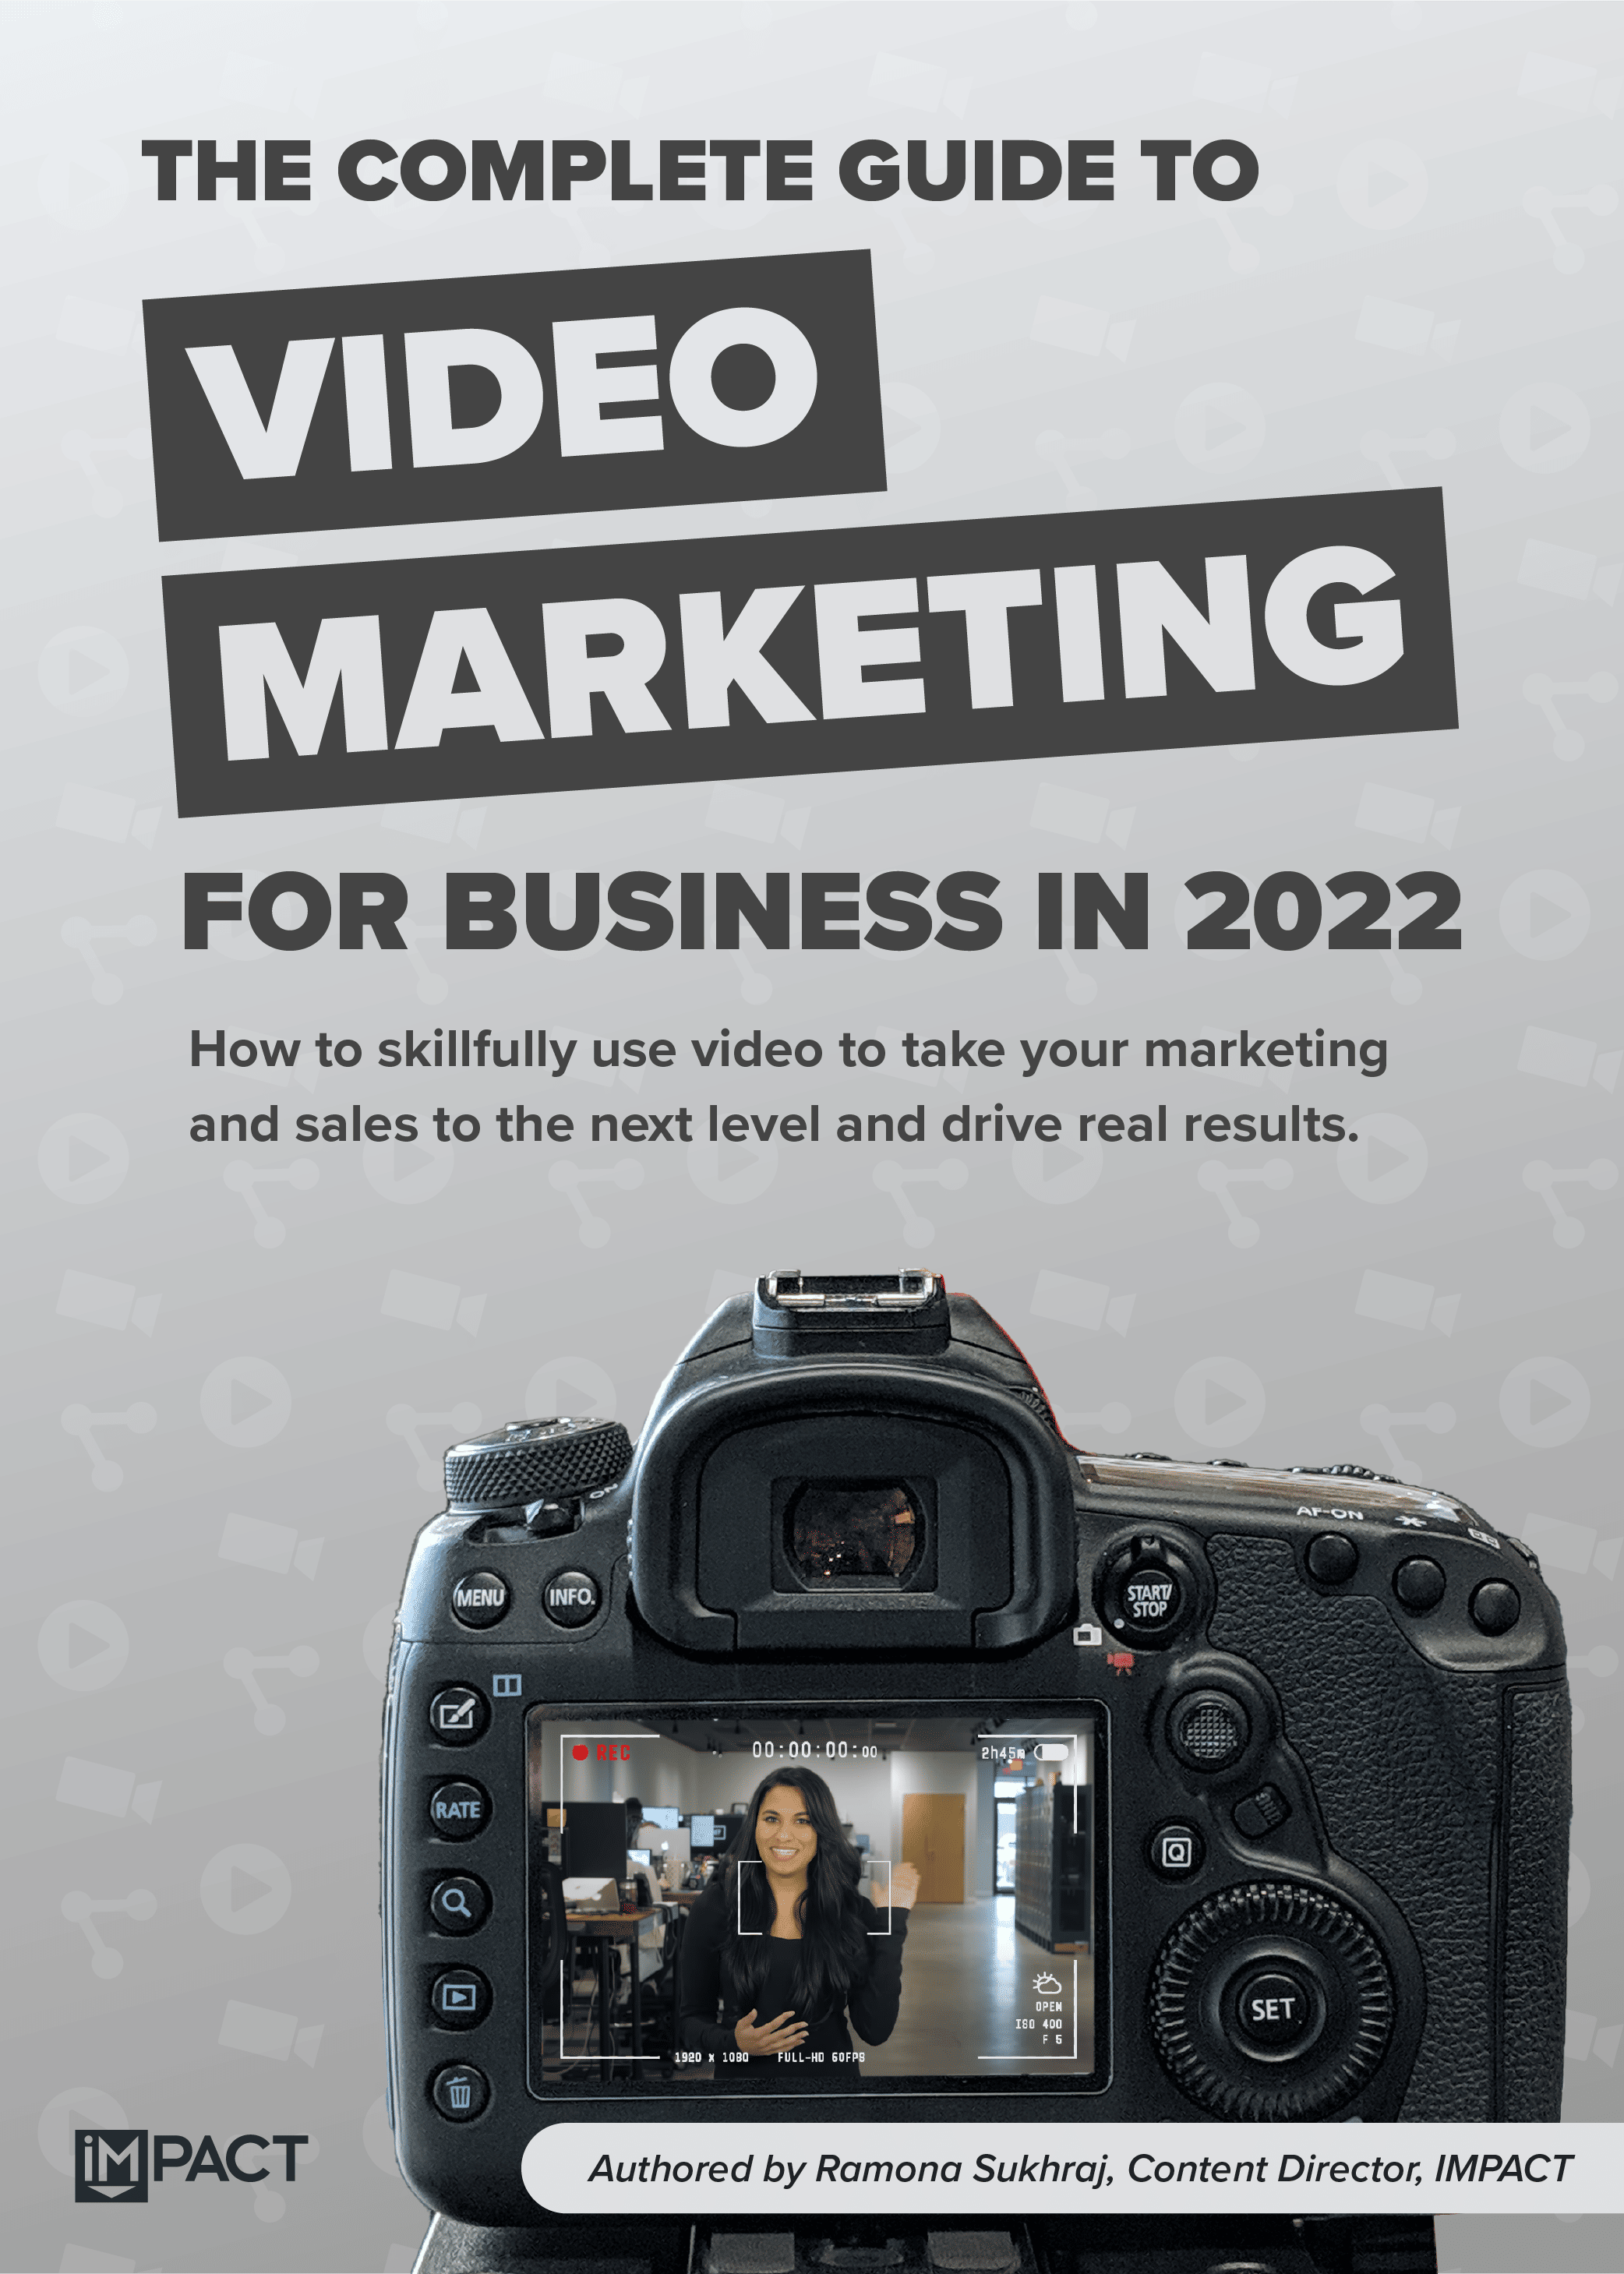 The Complete Guide to Video Marketing for Business in 2022